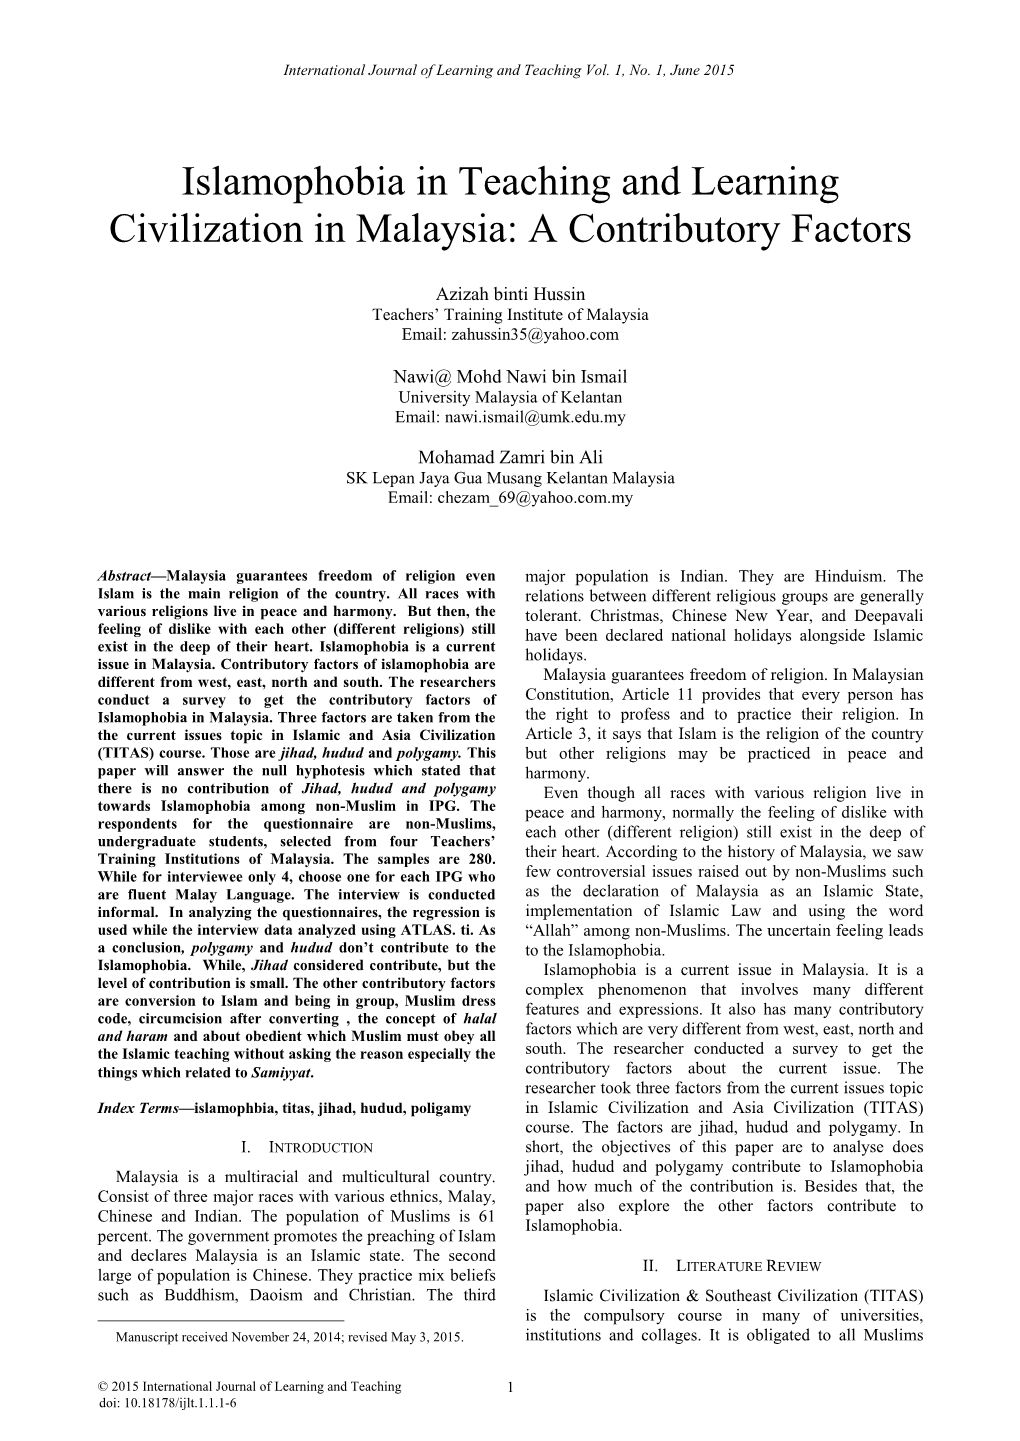 Islamophobia in Teaching and Learning Civilization in Malaysia: a Contributory Factors